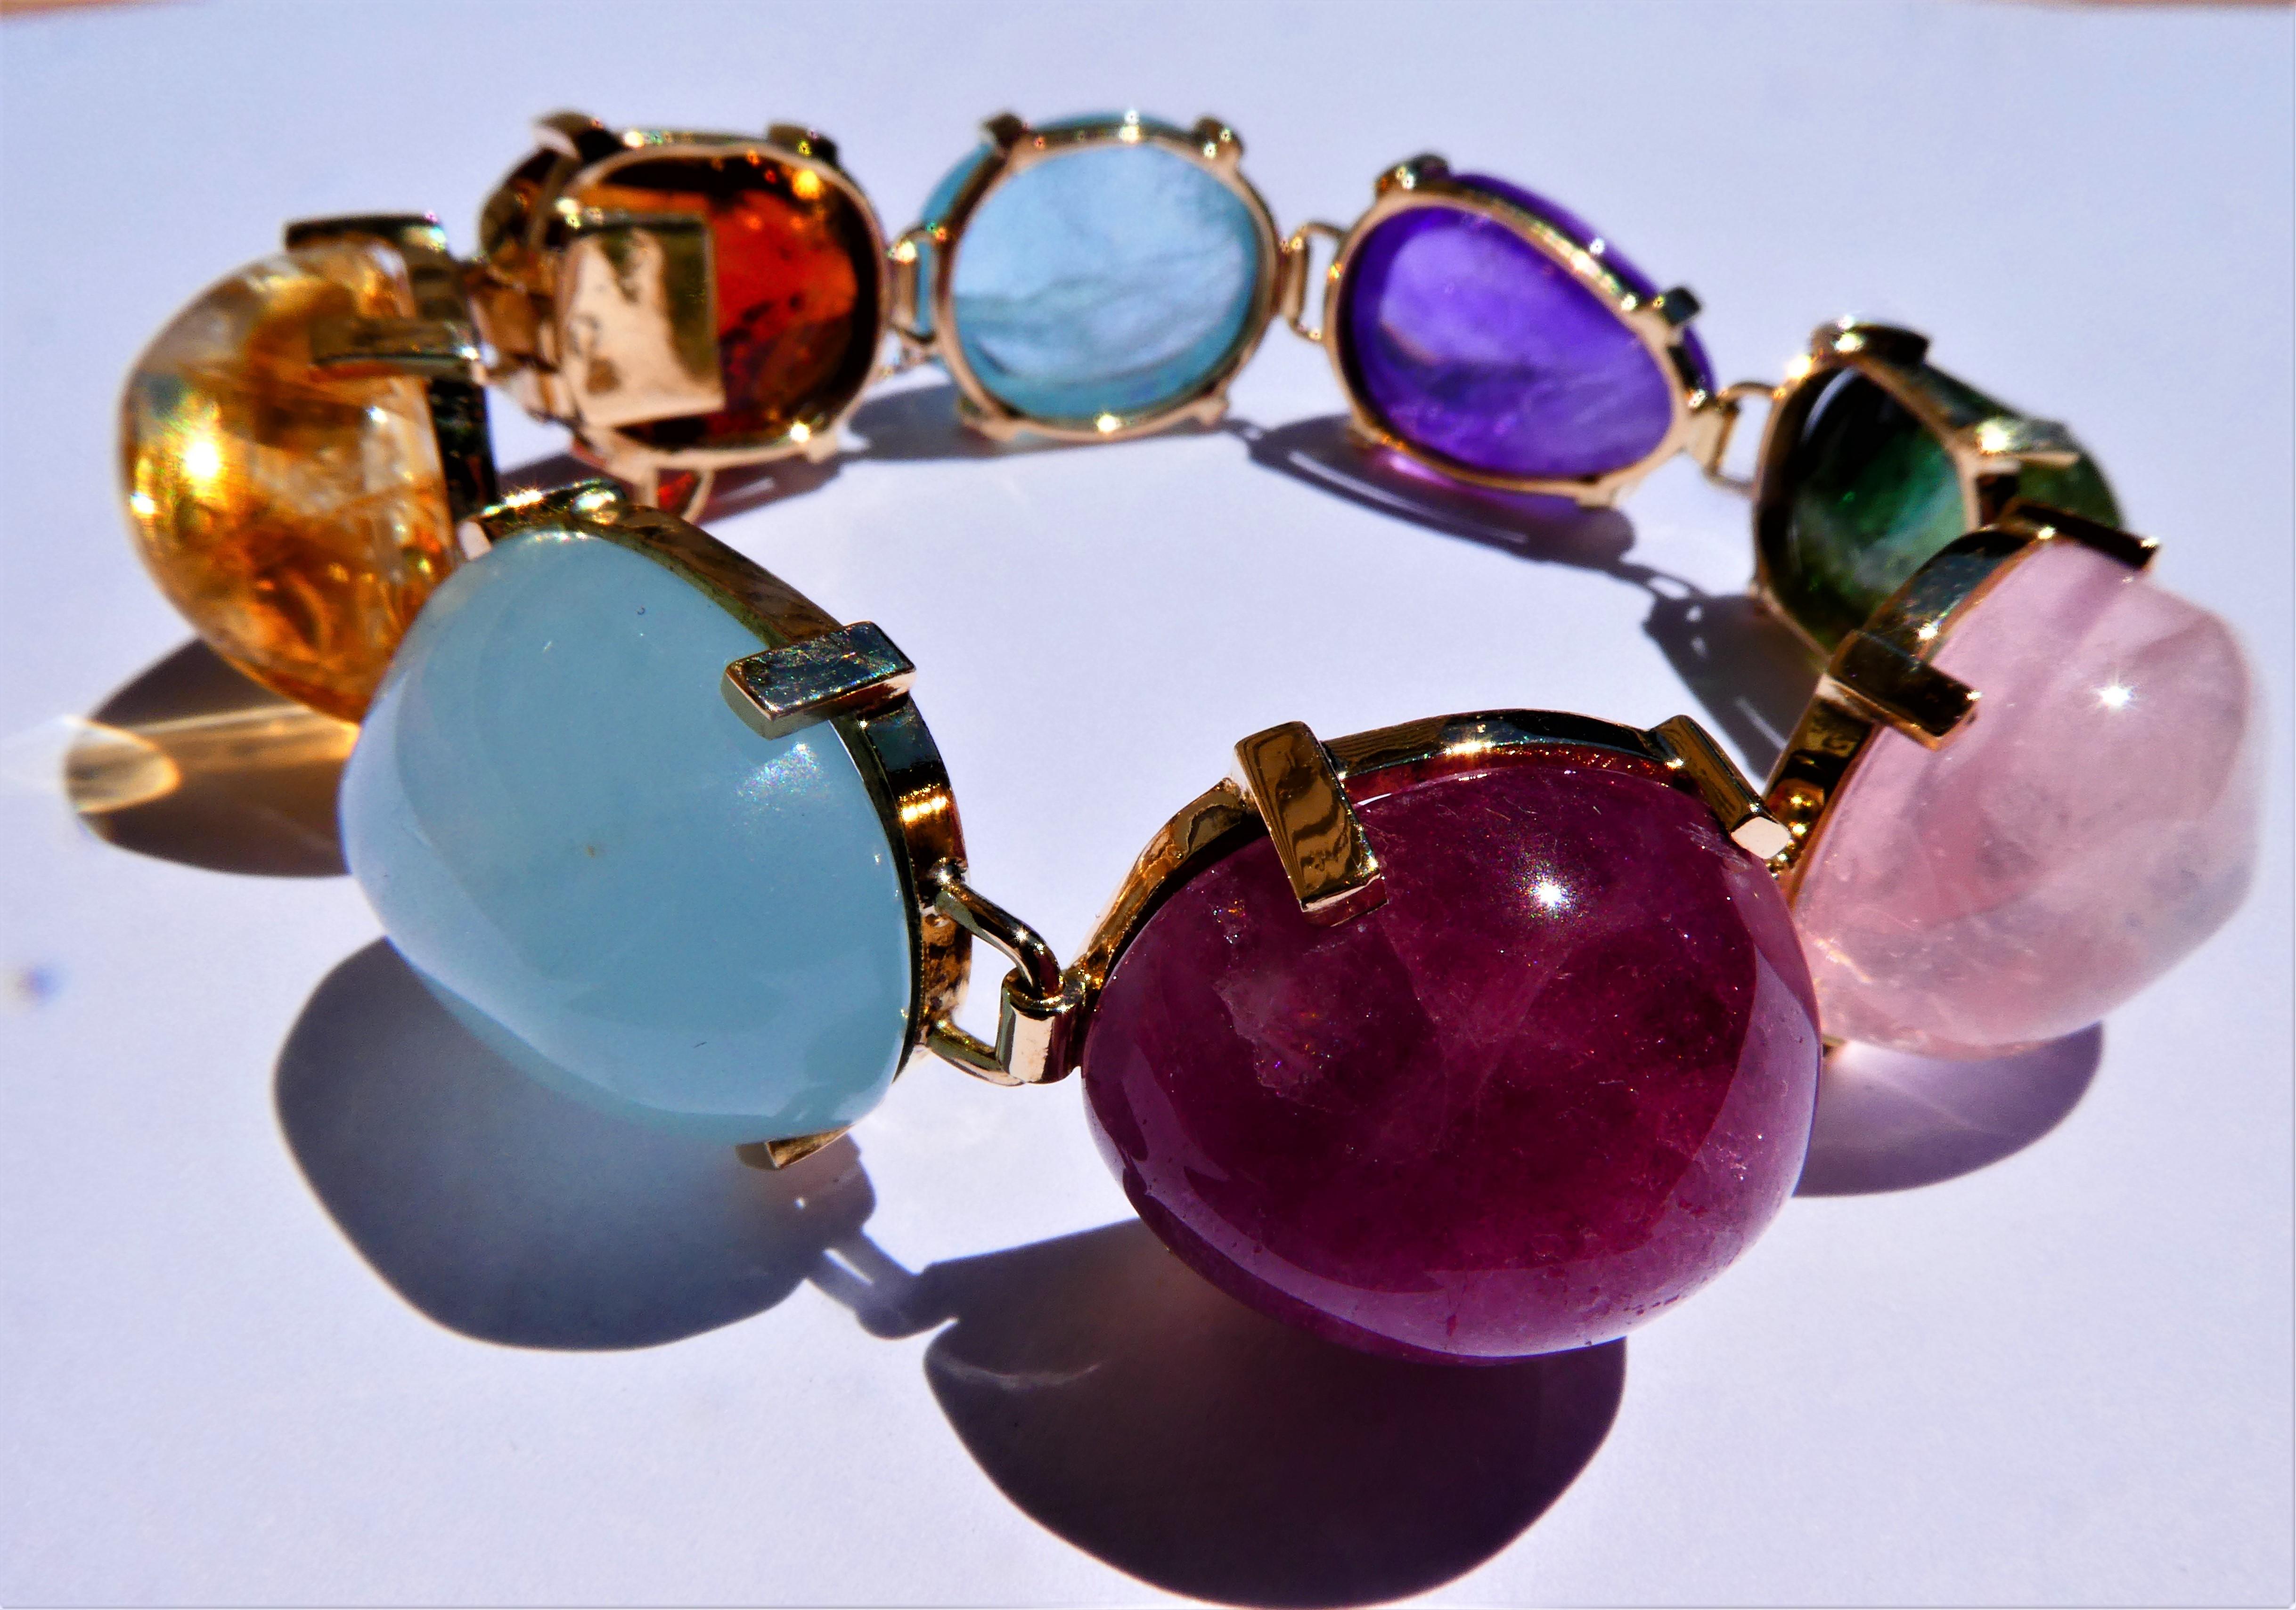 Gorgous multi-color Tutti-Frutti bracelet from the 1960s consisting of eight large semi-precious gemstones in an irregular oval cabochon cut. Two blue aquamarines, one purple amethyst, one pink rose quartz, one light and one dark yellow citrine, one